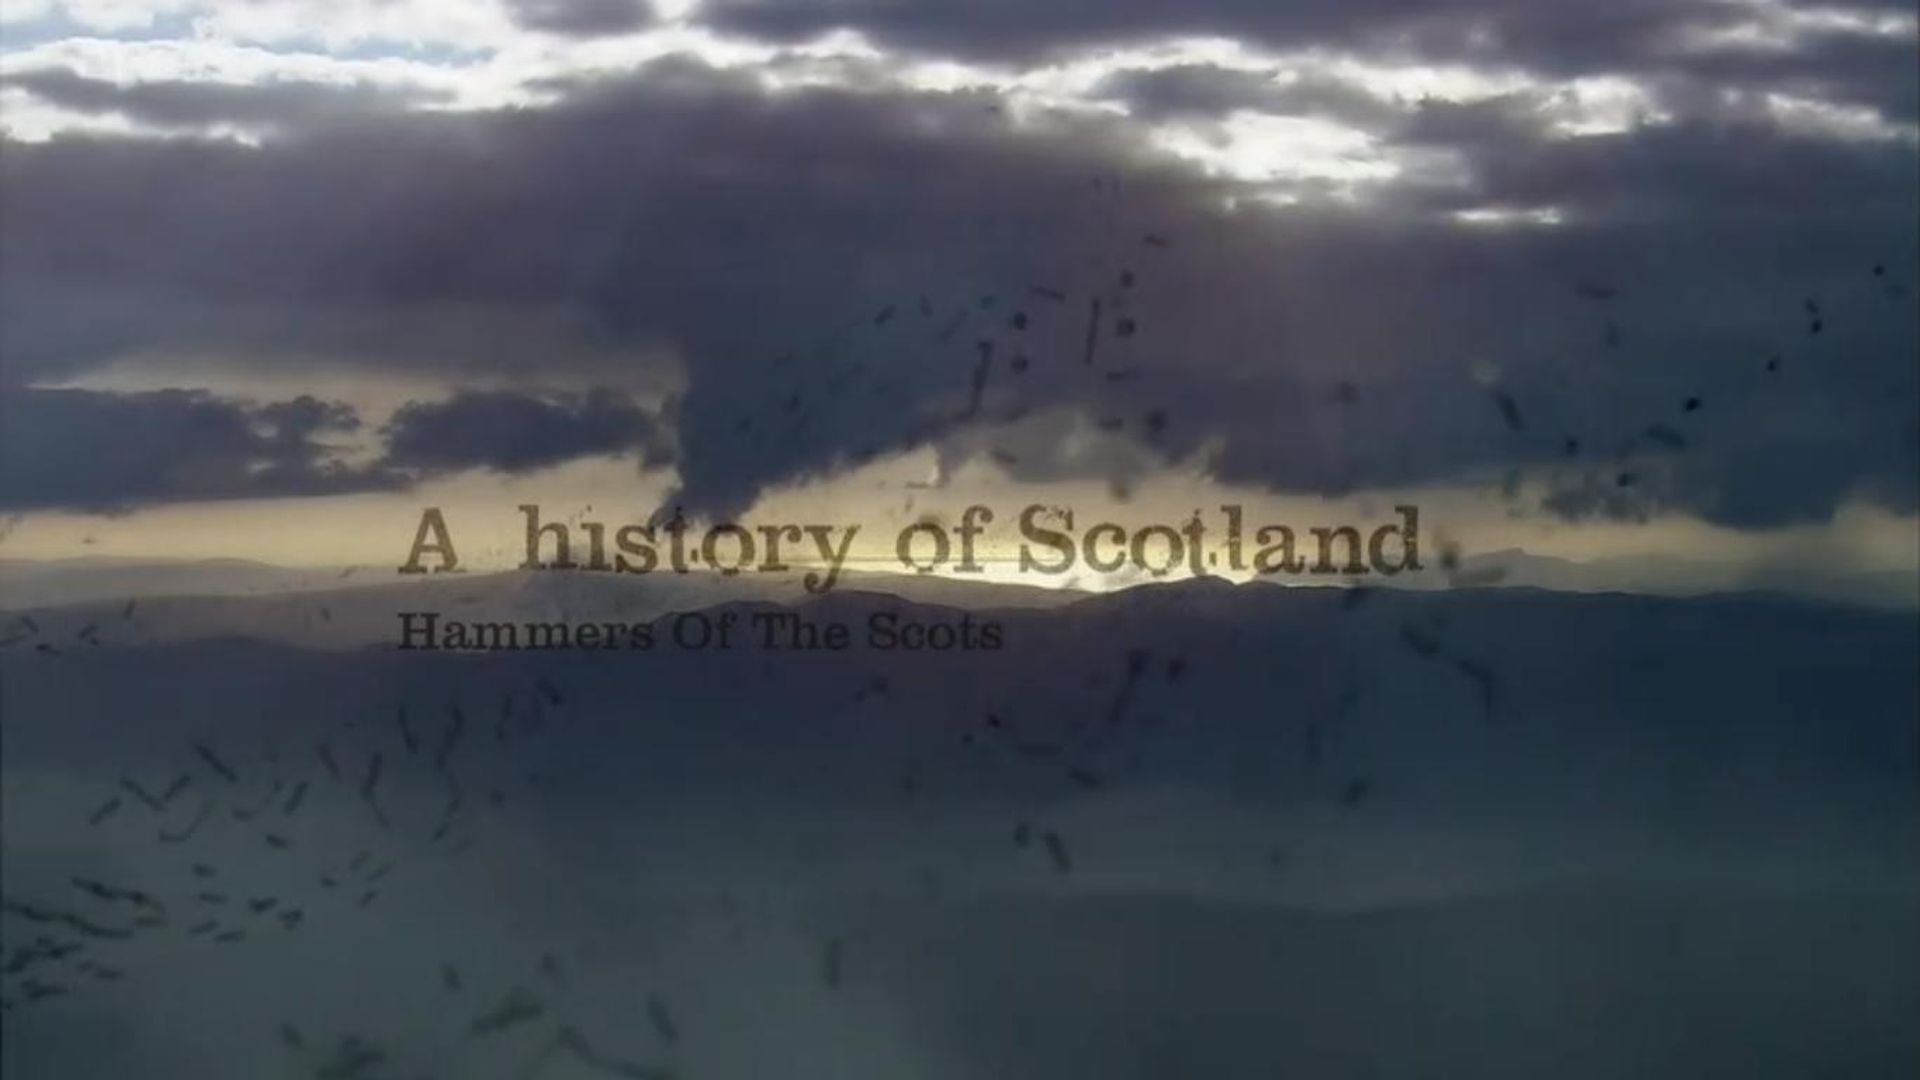 A History of Scotland background